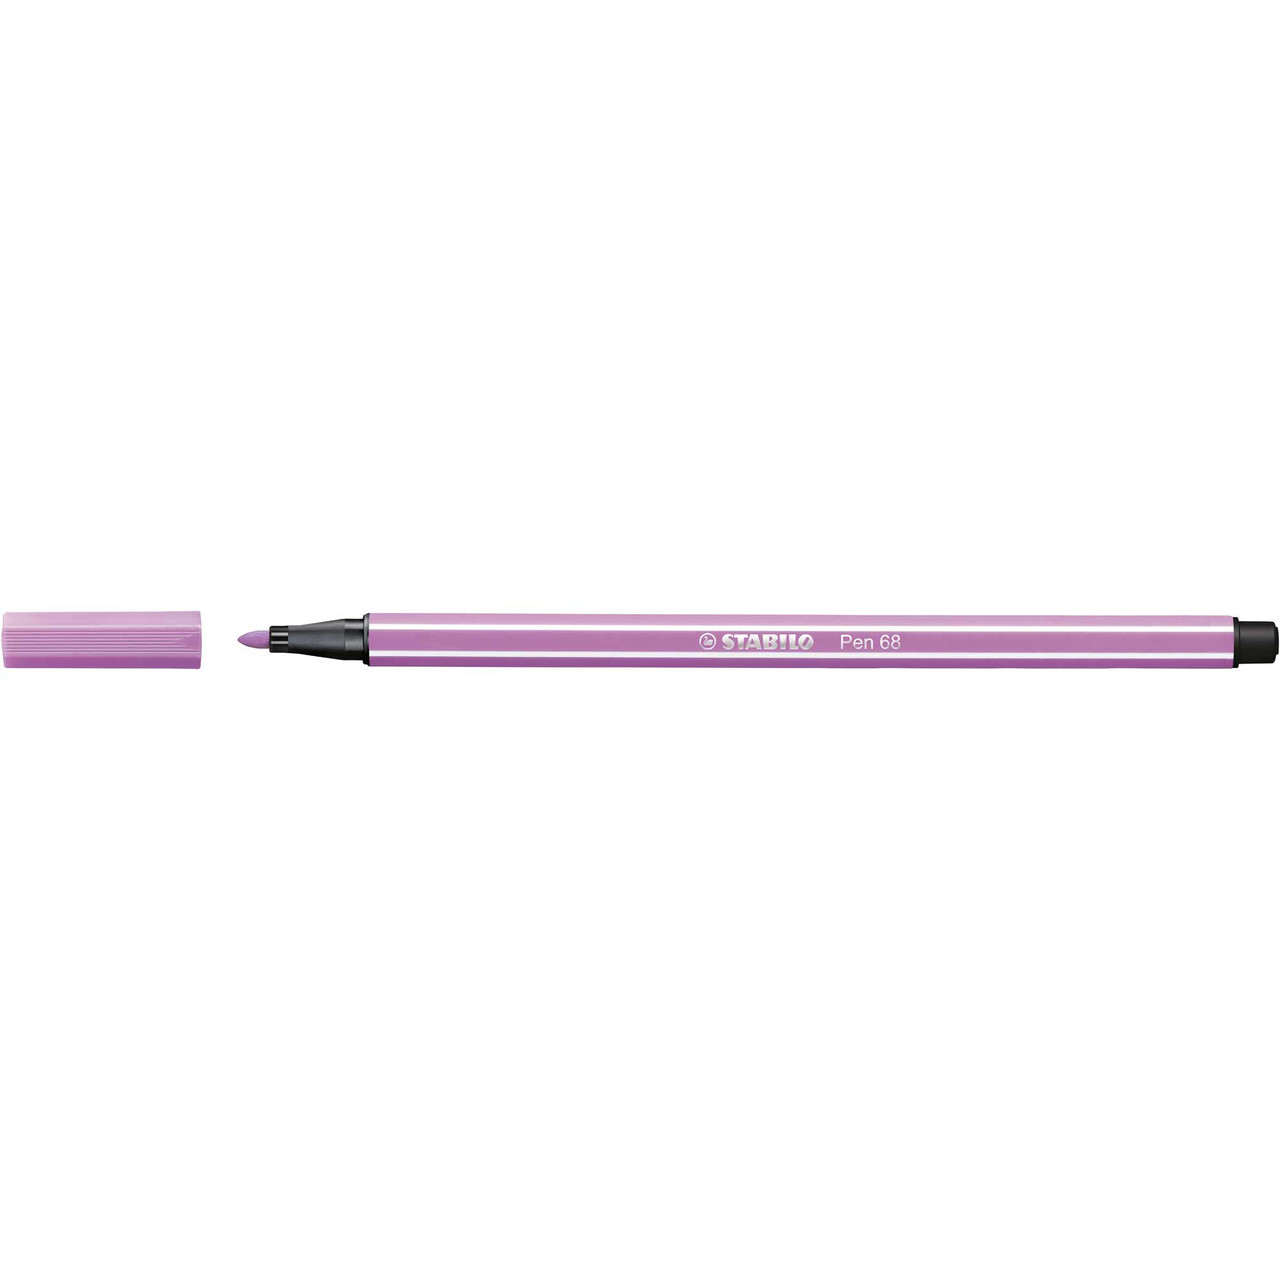 Stabilo Pen 68 Marker Light Lilac - Paint Artists' Materials and Framing